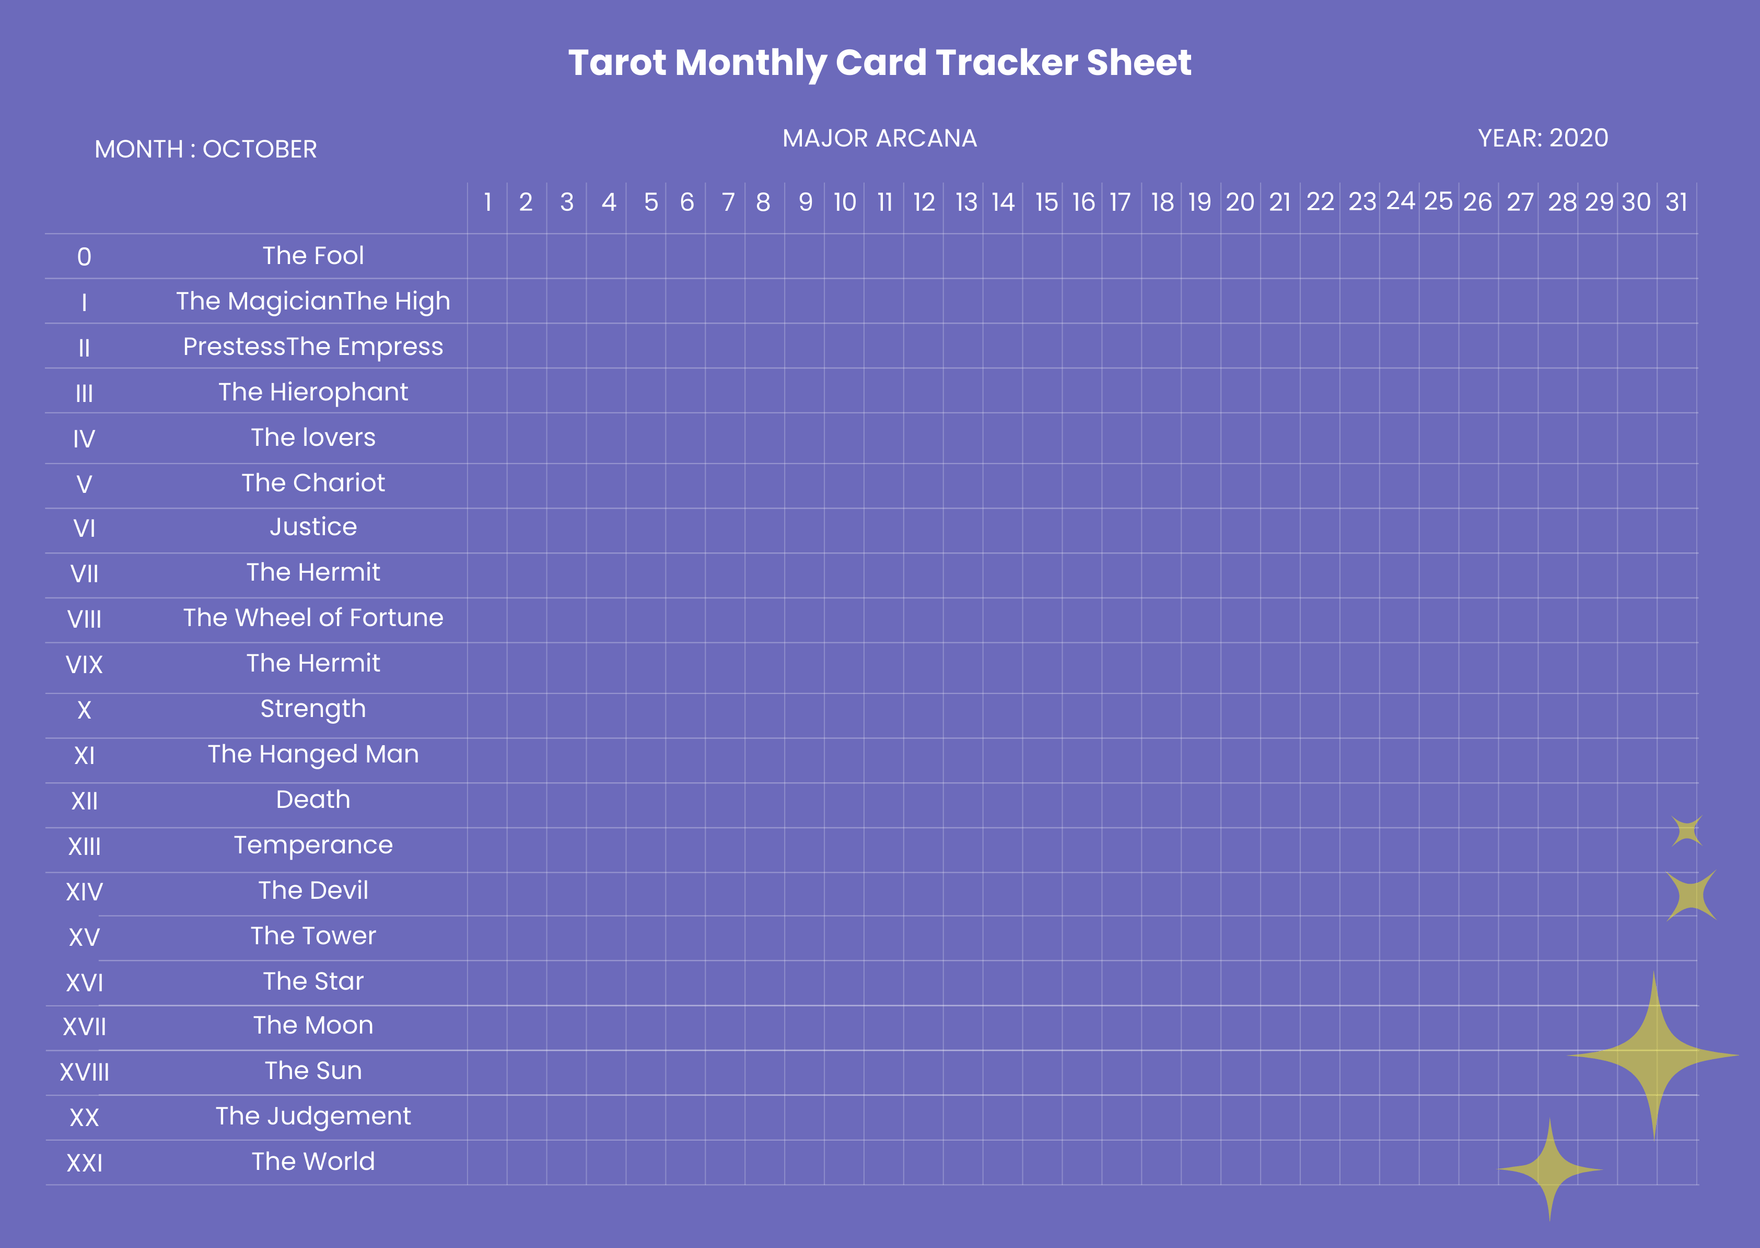 Free Tarot Monthly Card Tracker Sheet in Word, PDF, Illustrator, PSD, Apple Pages